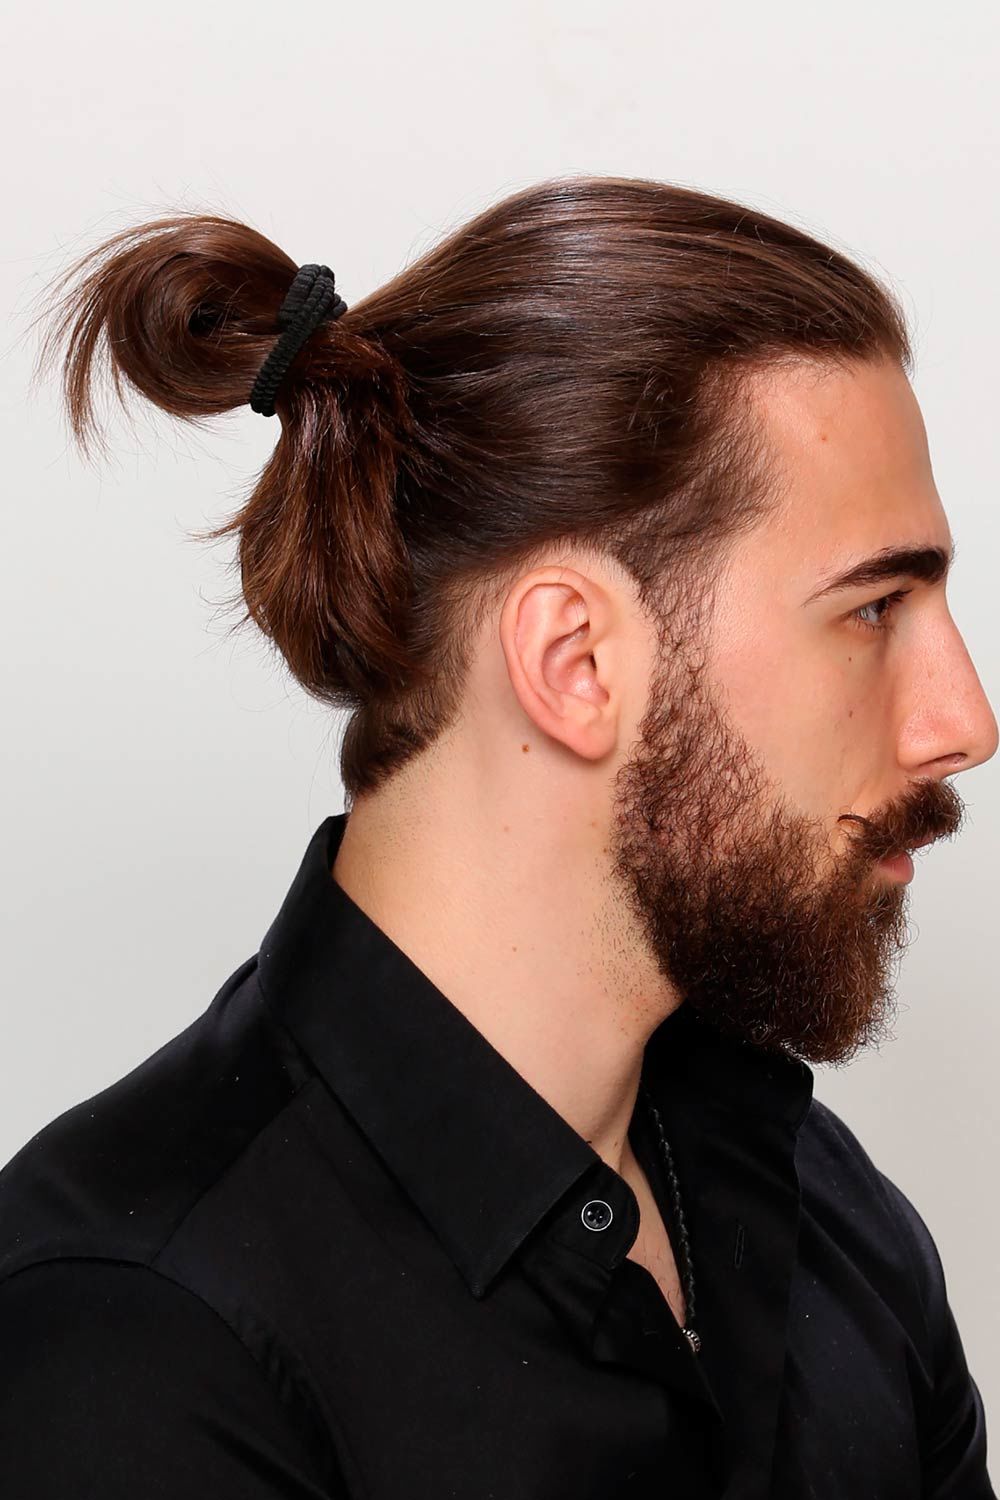 How To Get Style And Sport The On Trend Man Bun Hairstyle Hair · 1 decade ago. man bun hairstyle